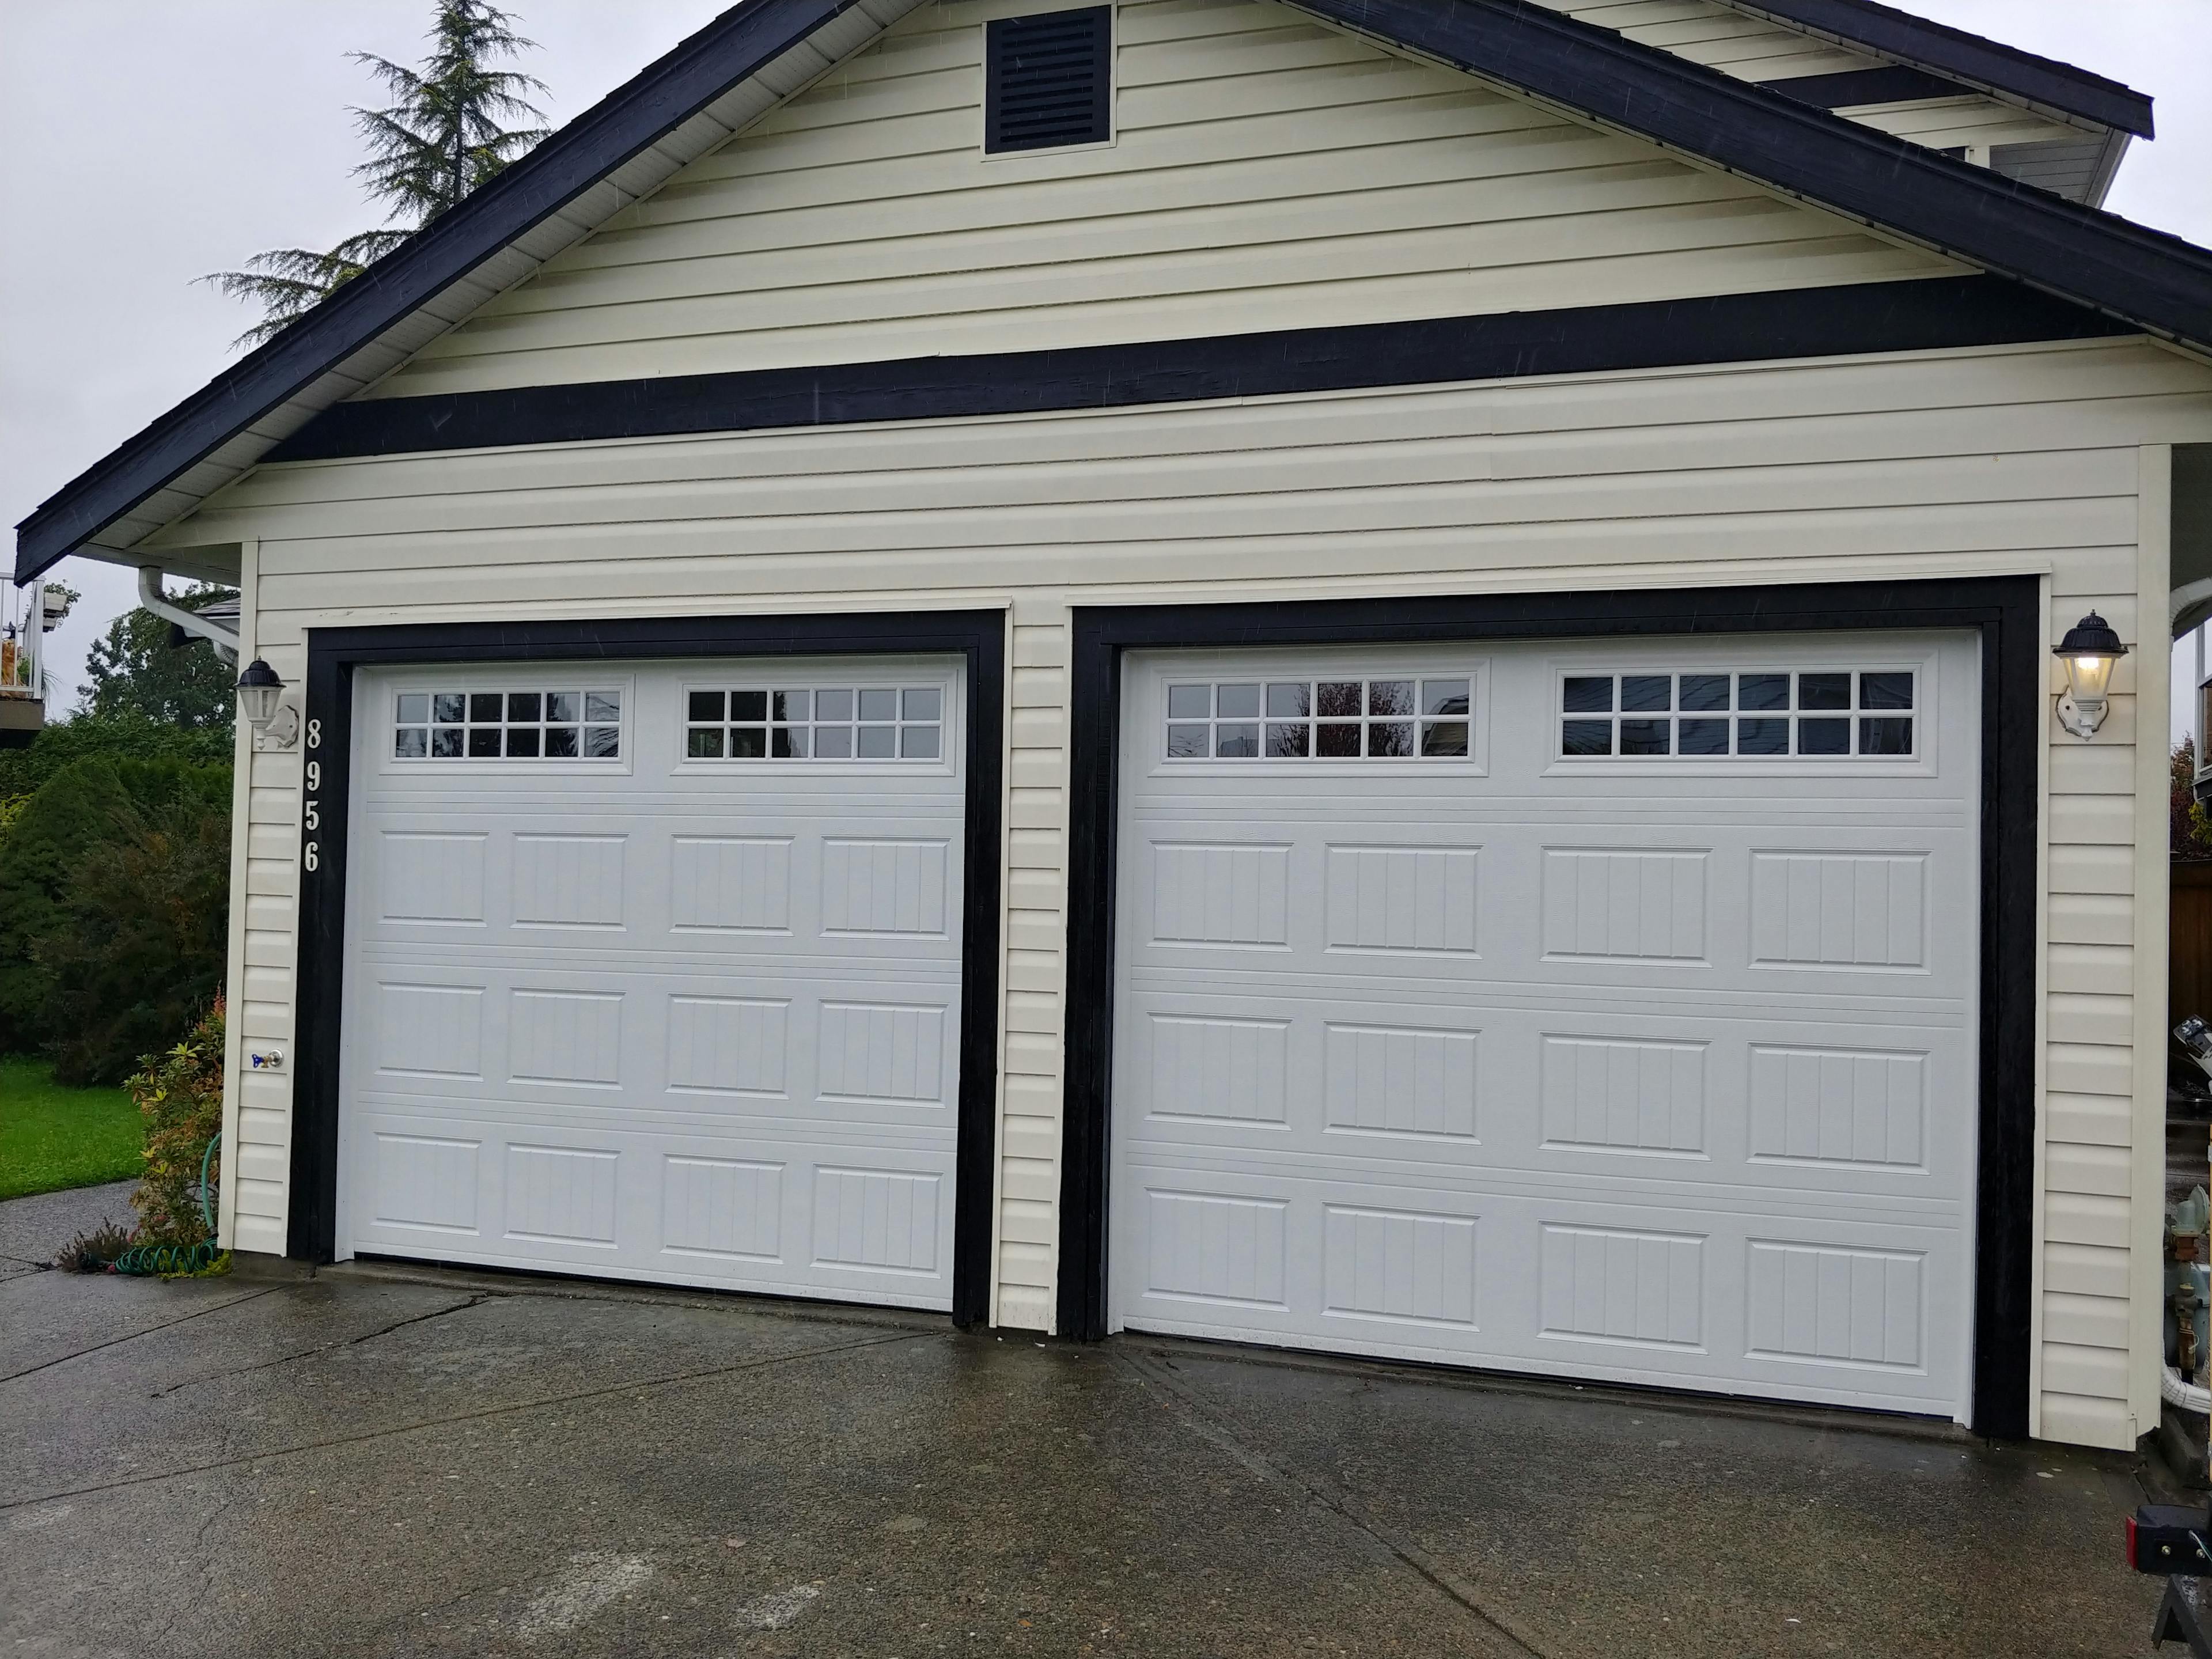 White paneled garage doors with small glass panels at the top